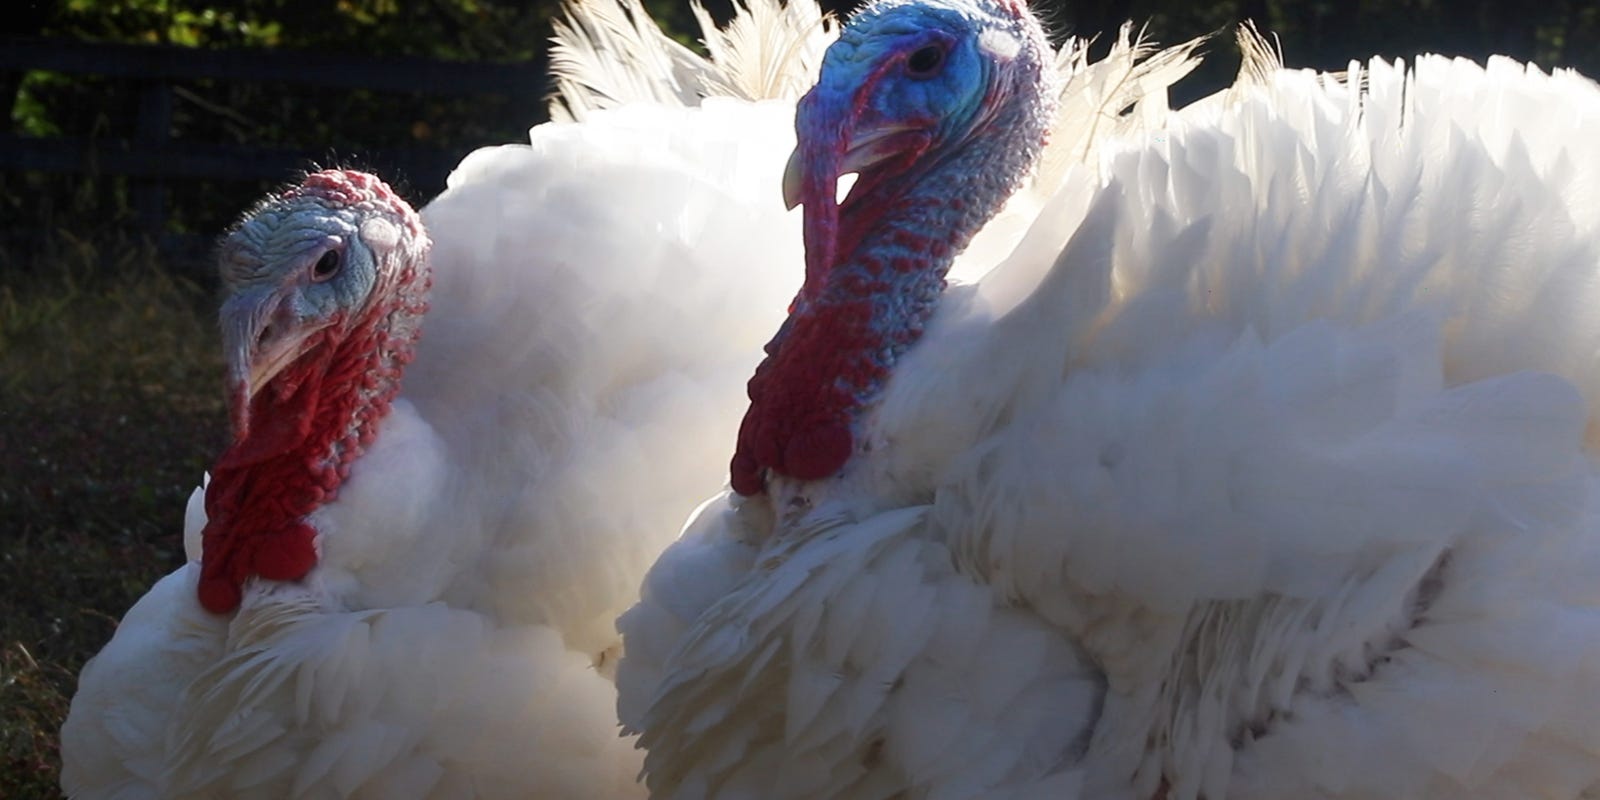 Want a fresh turkey? Here's where to find one